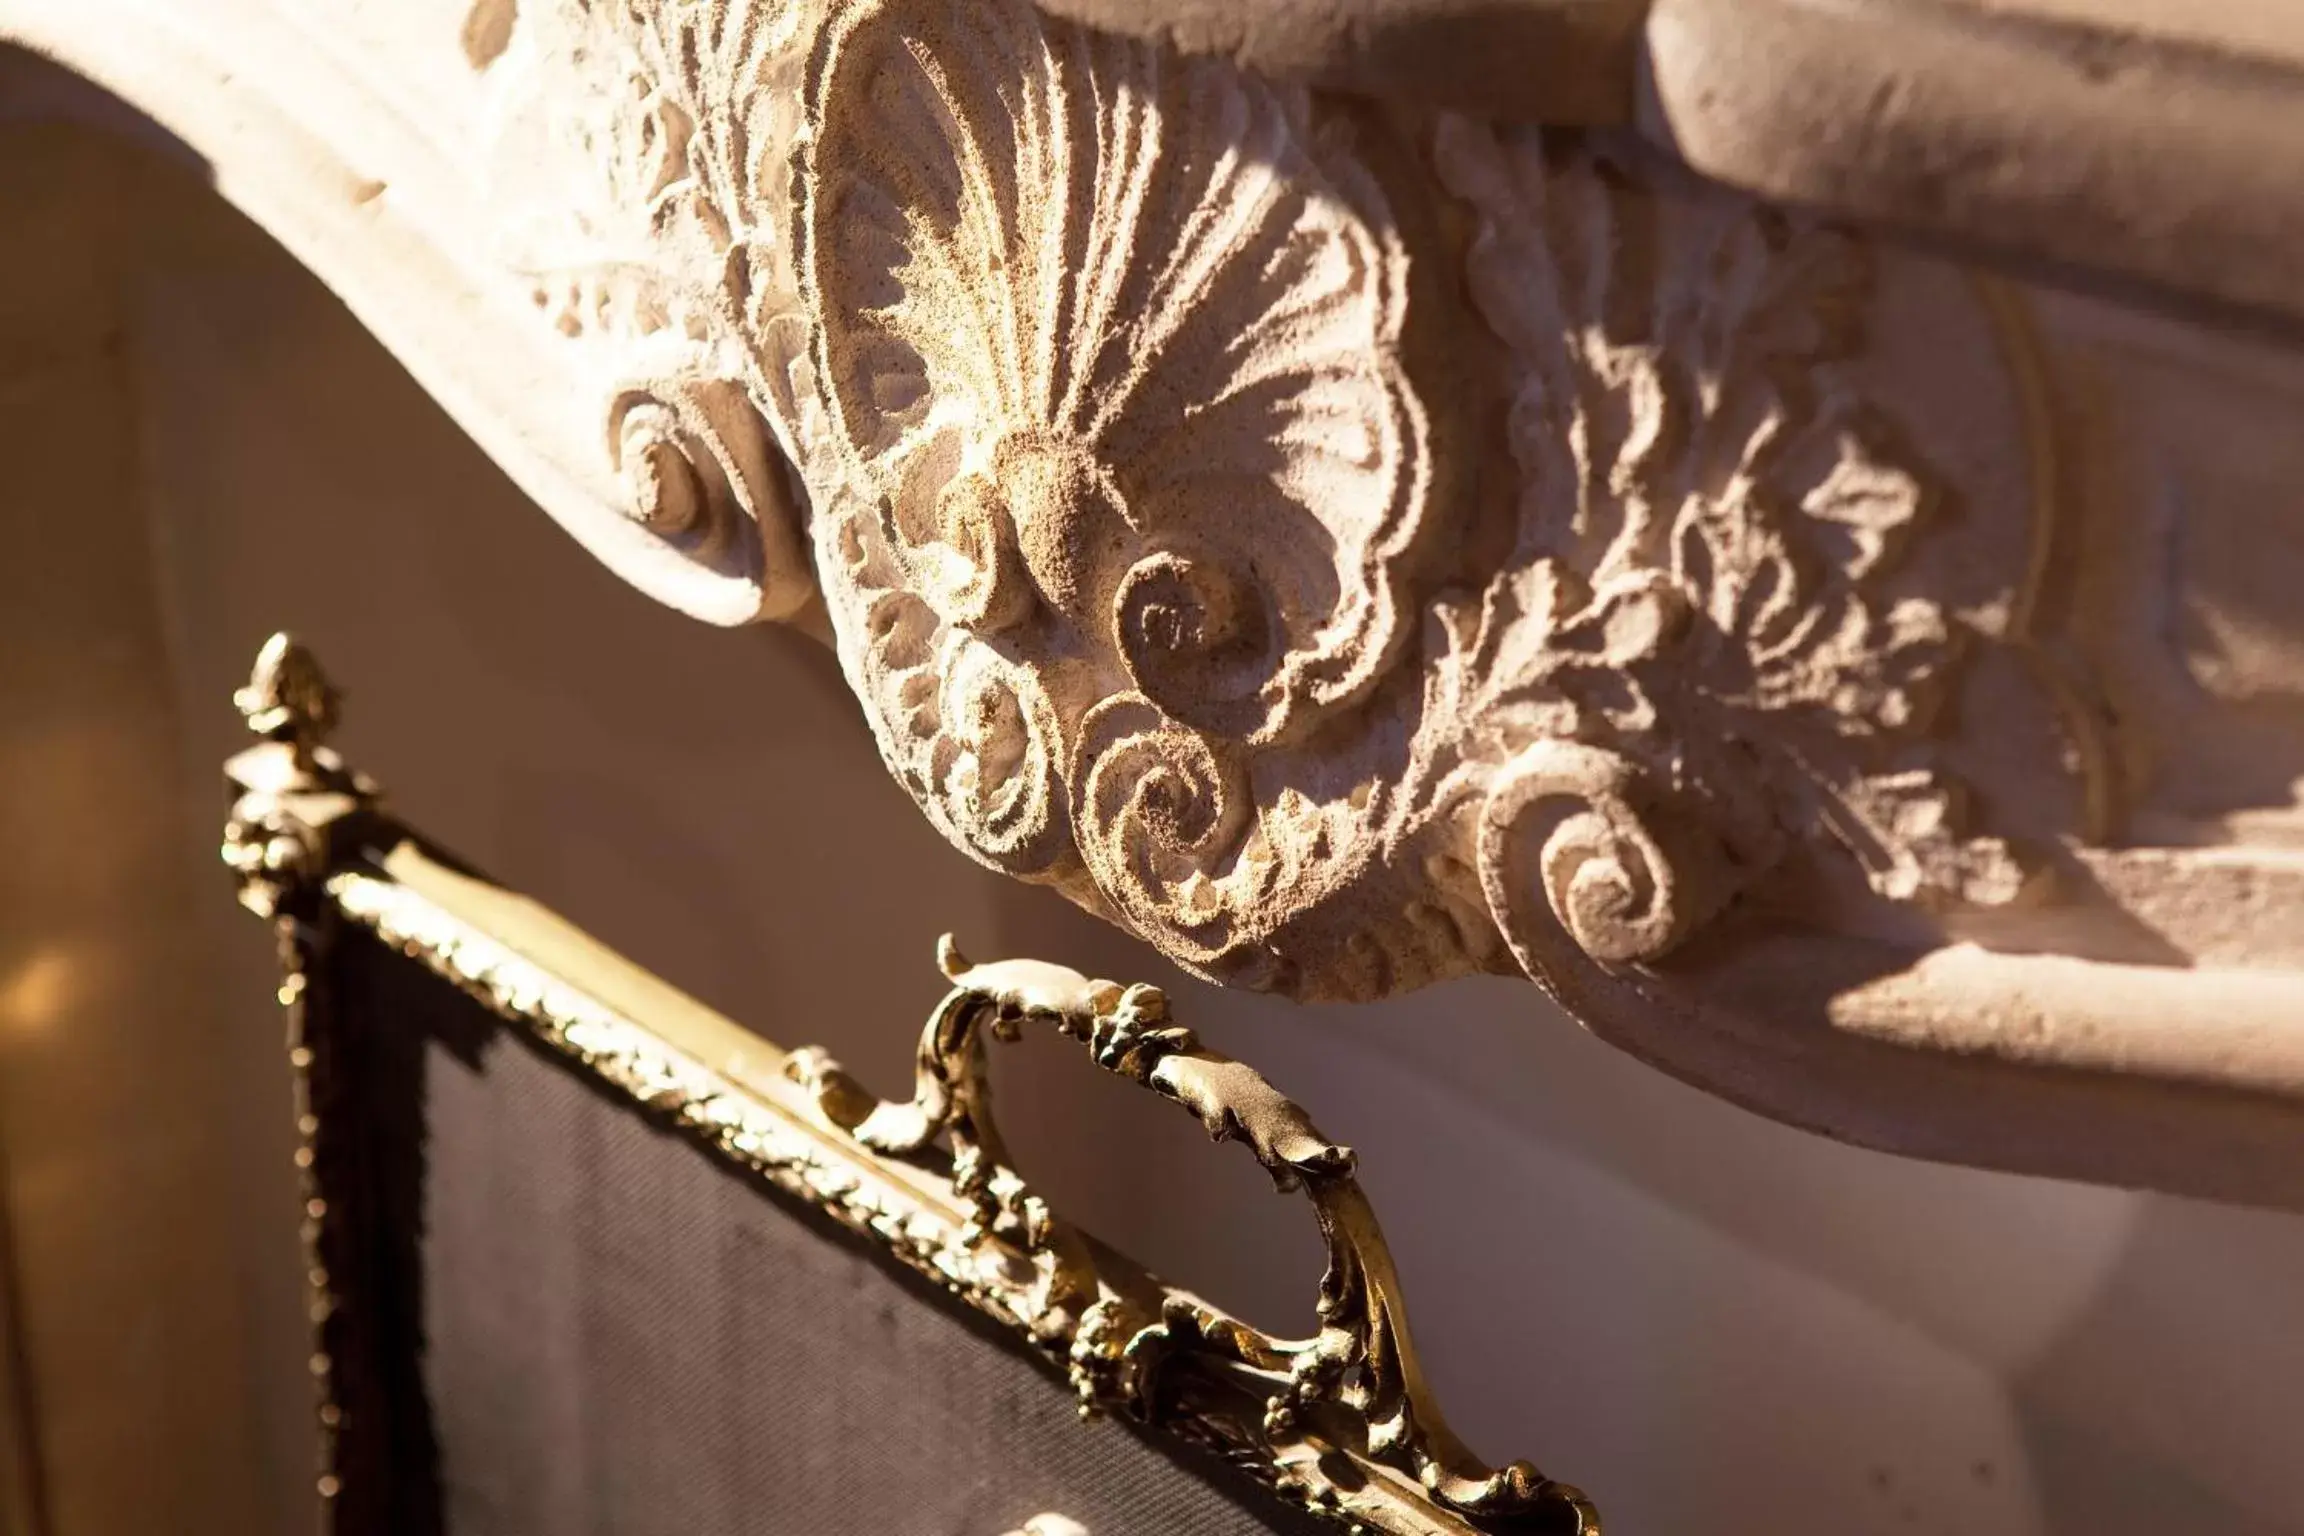 Decorative detail in Hotel d'Angleterre